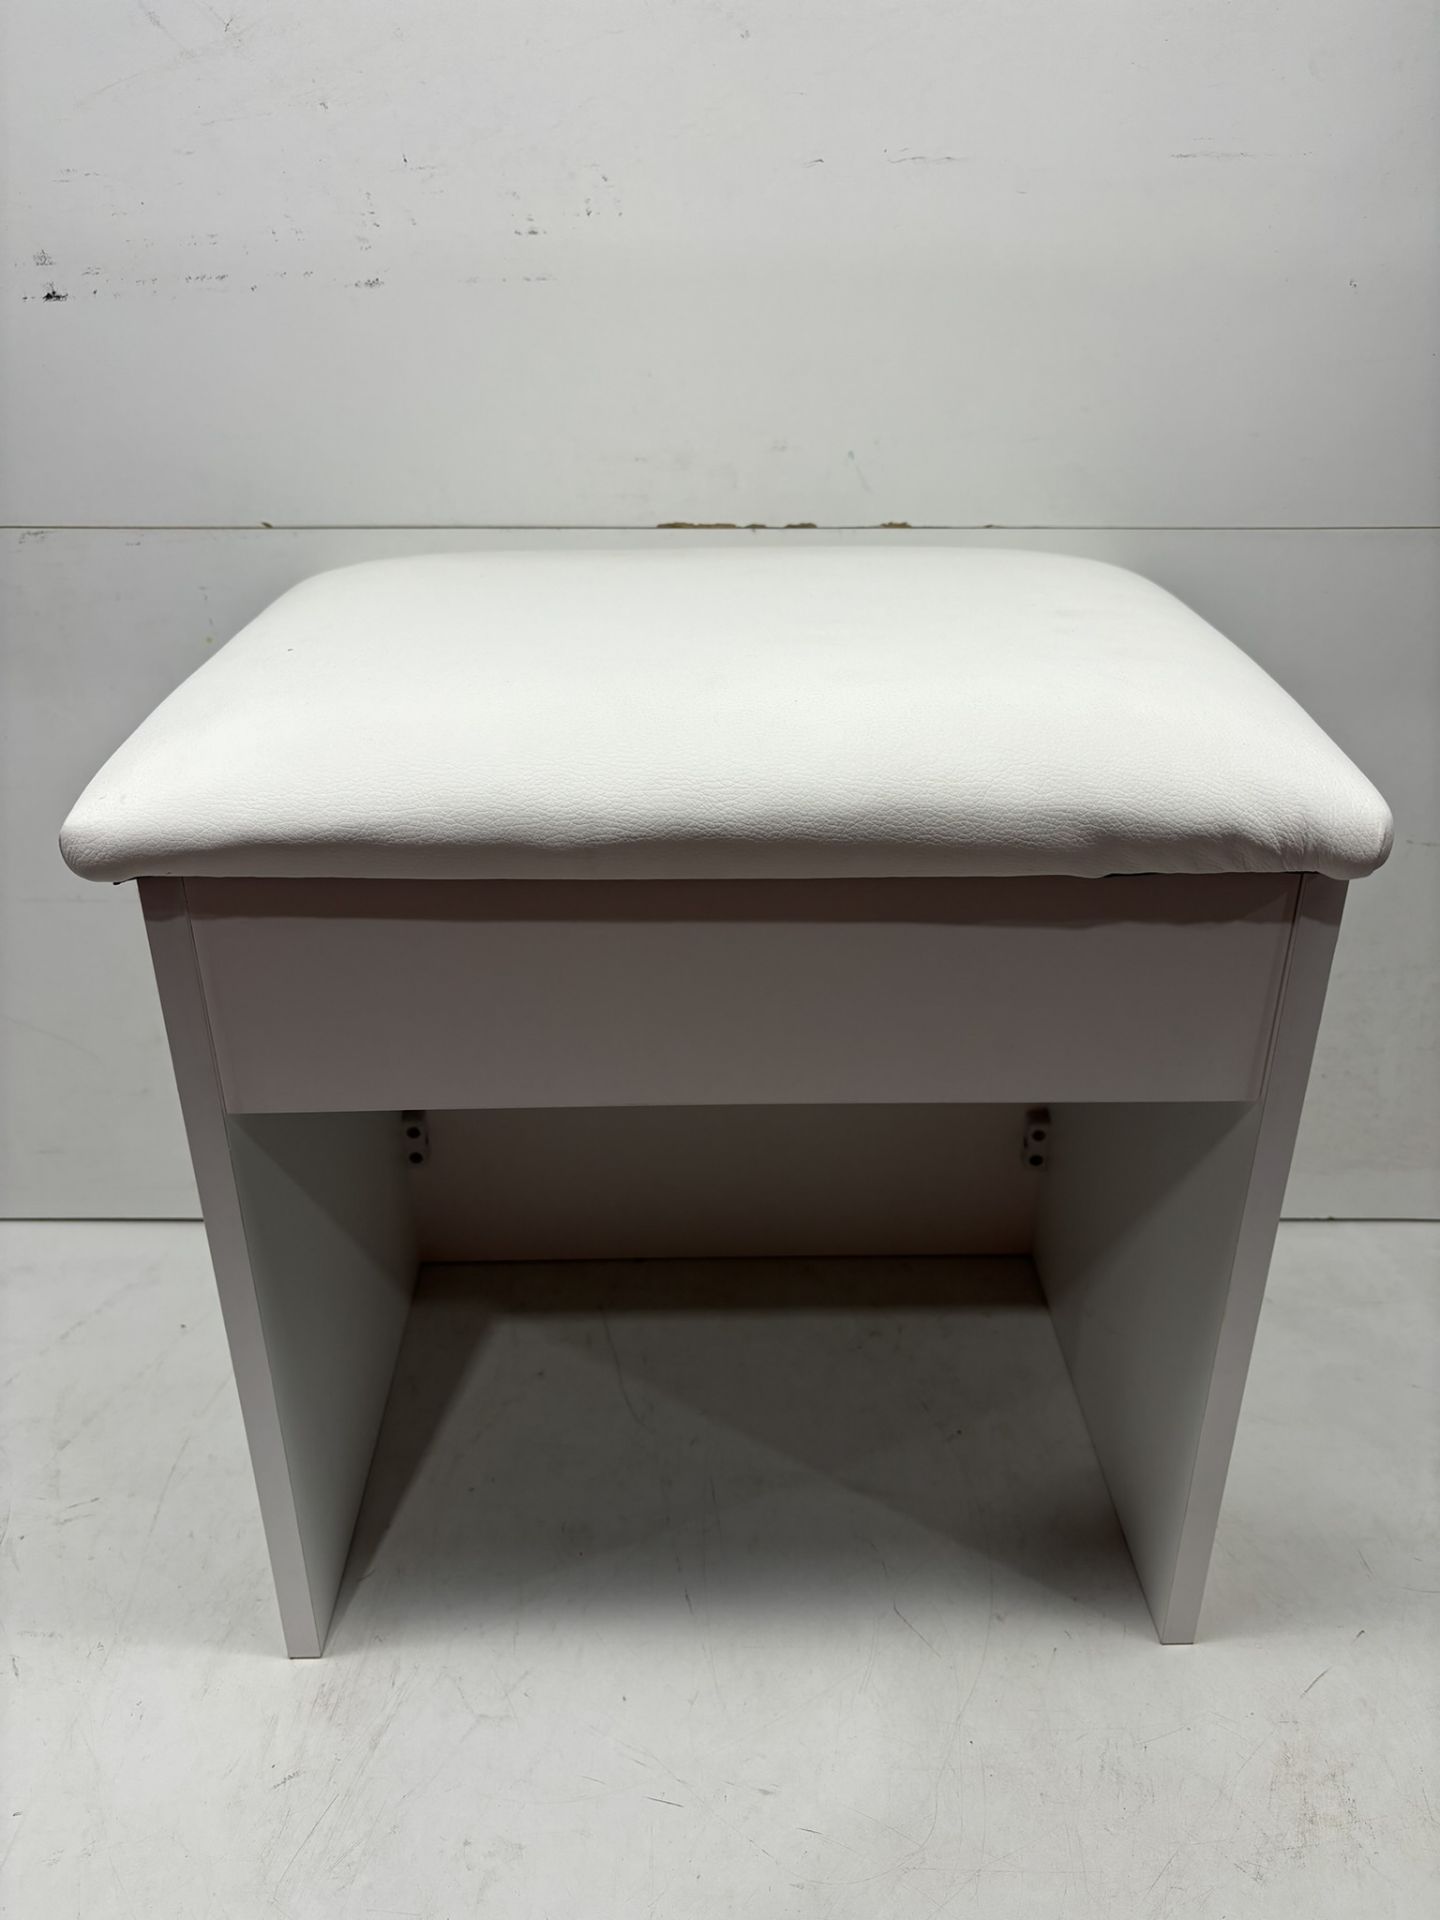 Ex-Display Small Wooden White Footstool With Cushioned Top